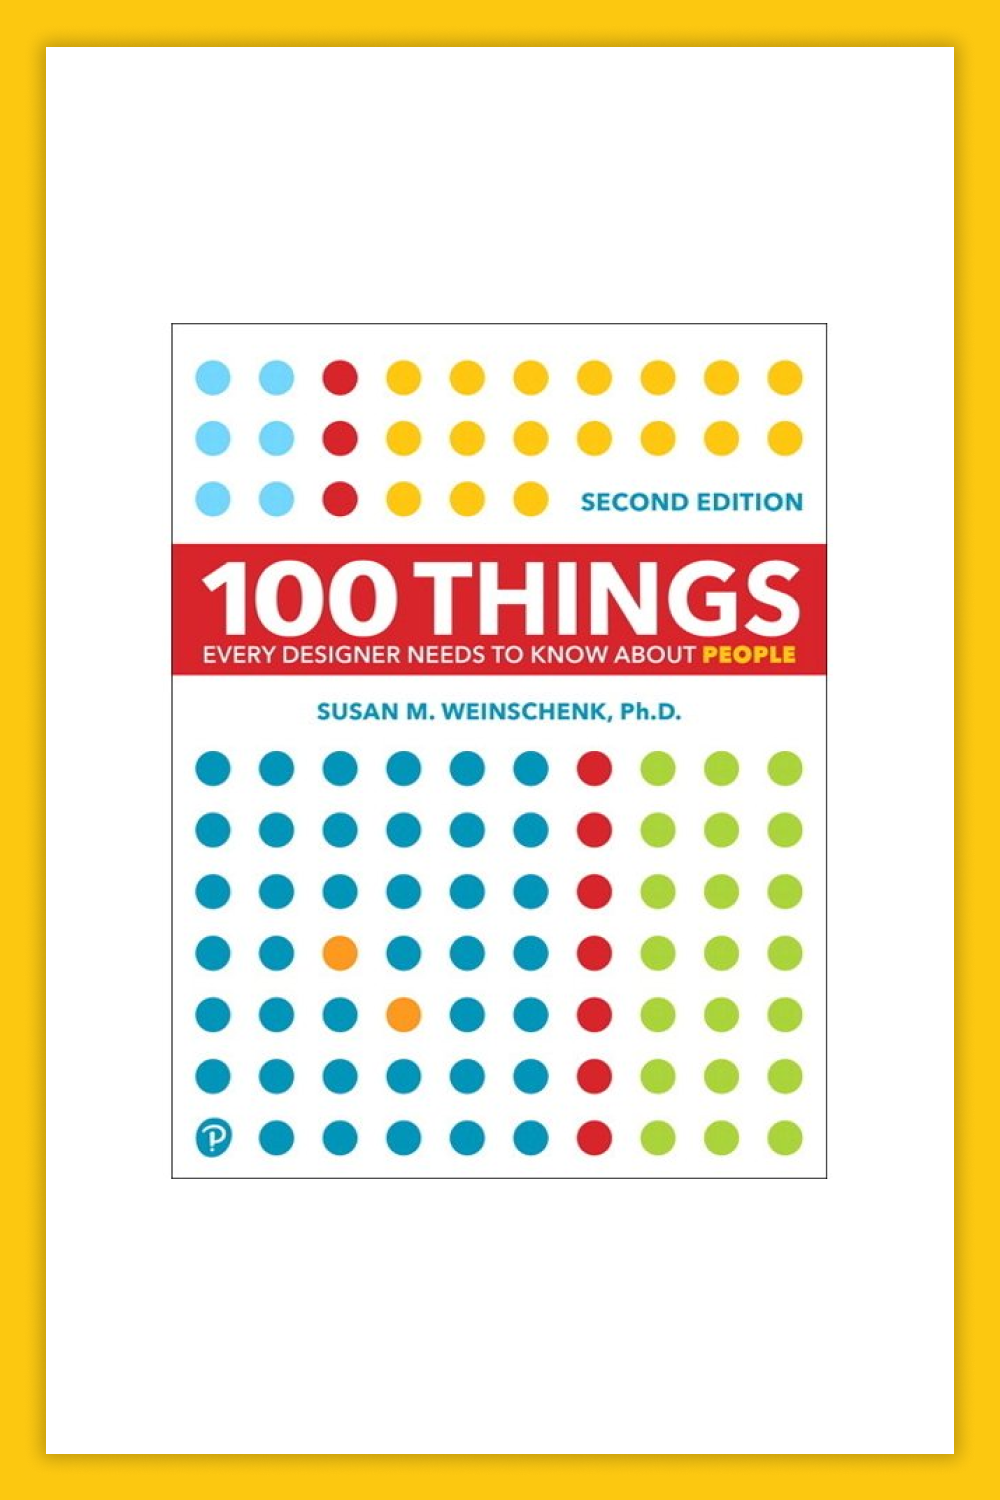 The book 100 Things Every Designer Needs to Know About People.